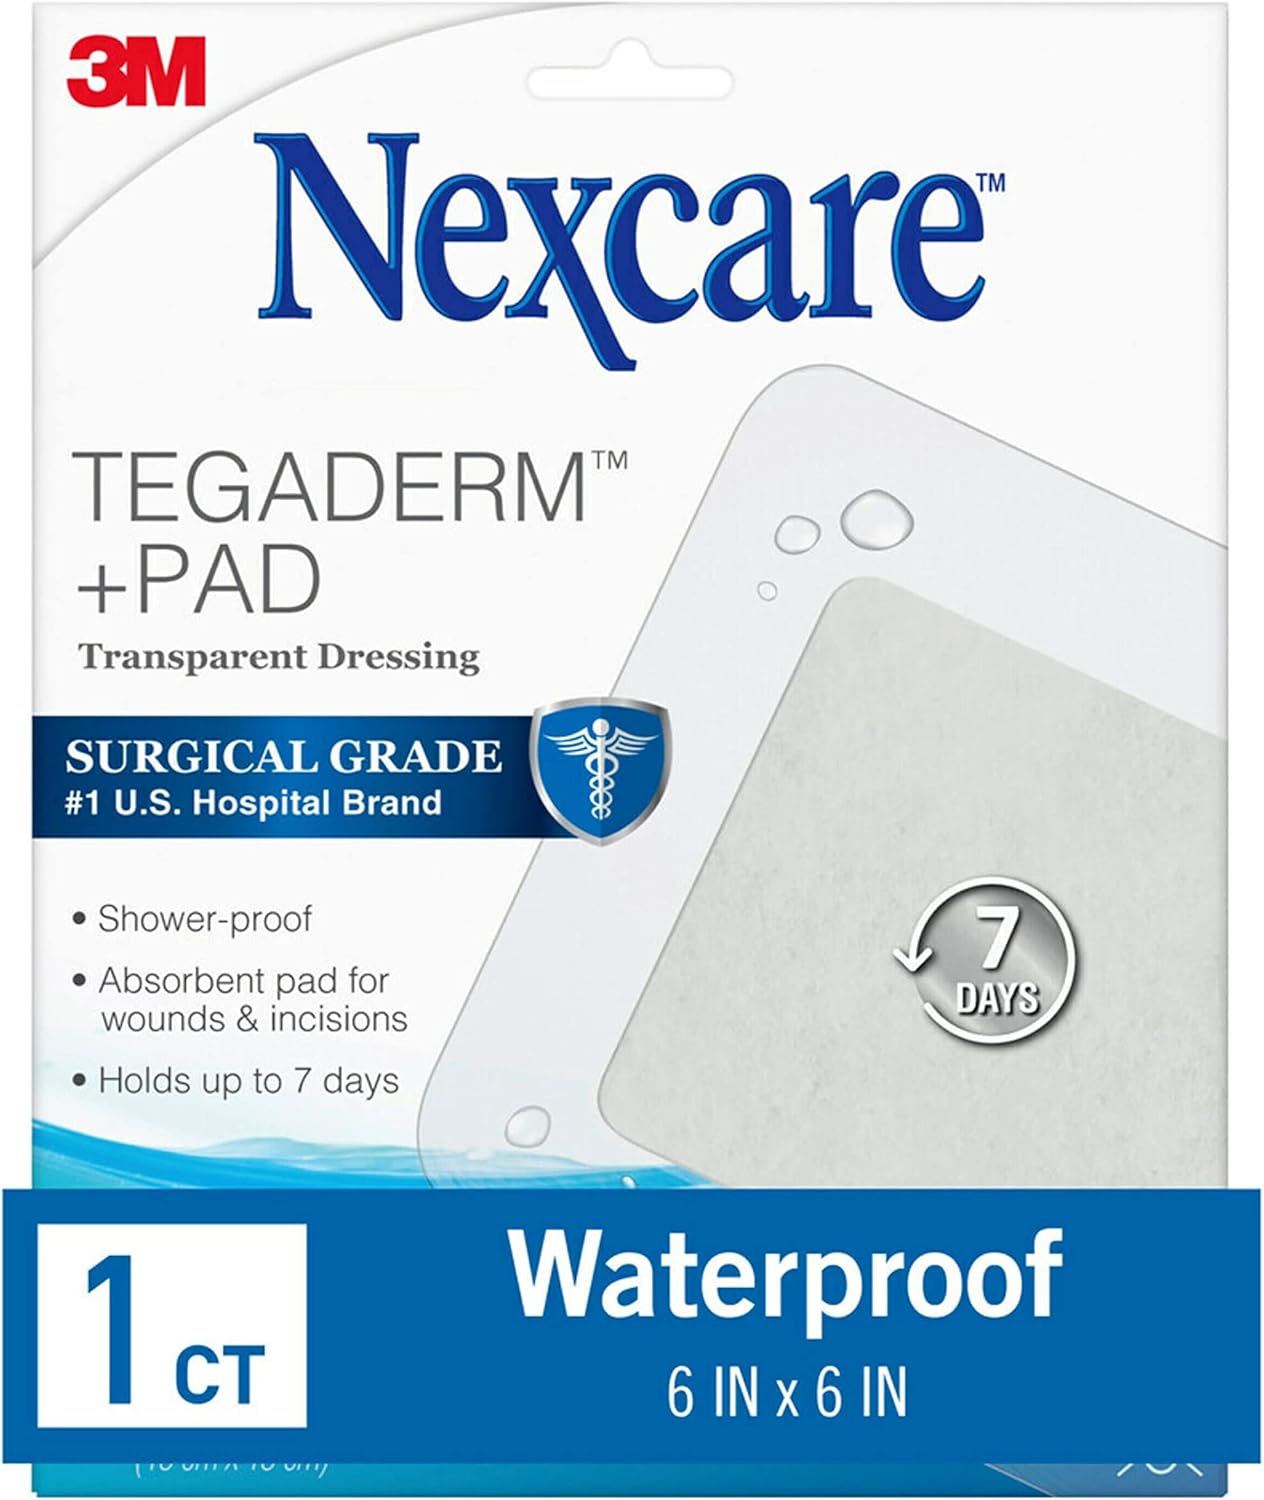 Nexcare Tegaderm + Pad Transparent Dressing, Absorbent Pad Wicks Fluid And Doesn't Stick To Your Wound, 6 x 6 in, 1 Count